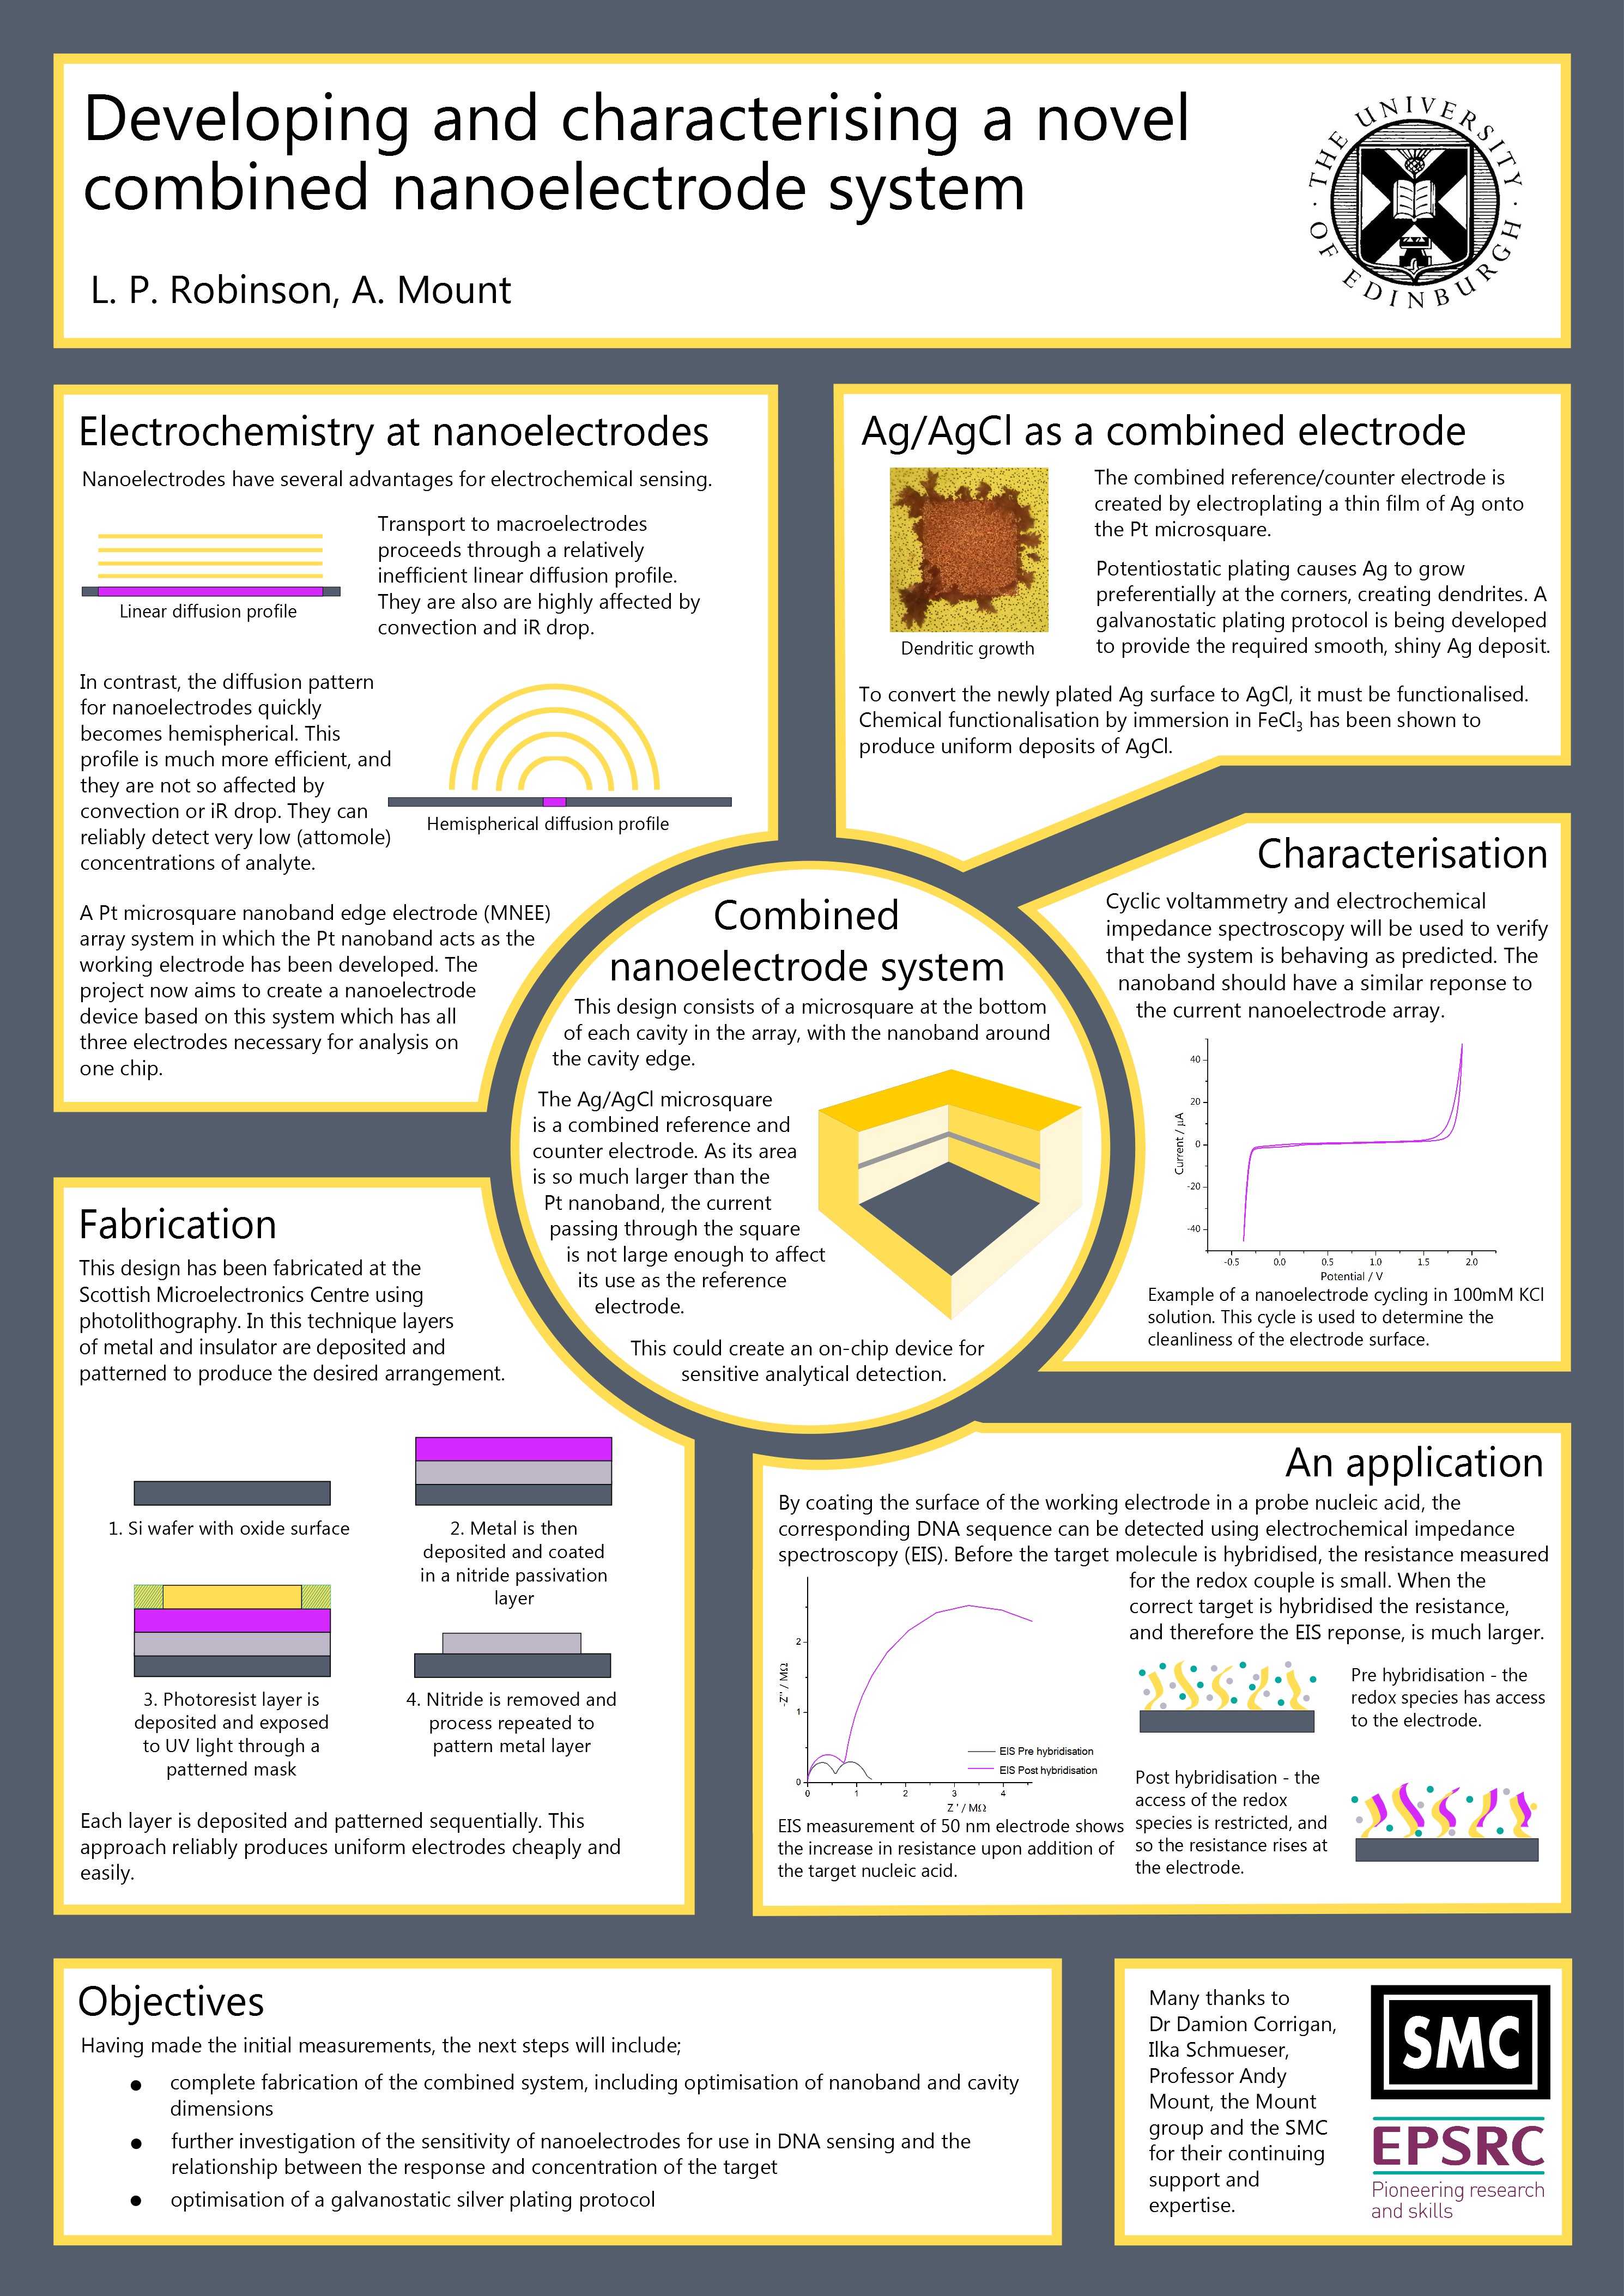 Pin By Lin On ACADEMIC POSTER Pinterest Scientific Poster Design Academic Template Free